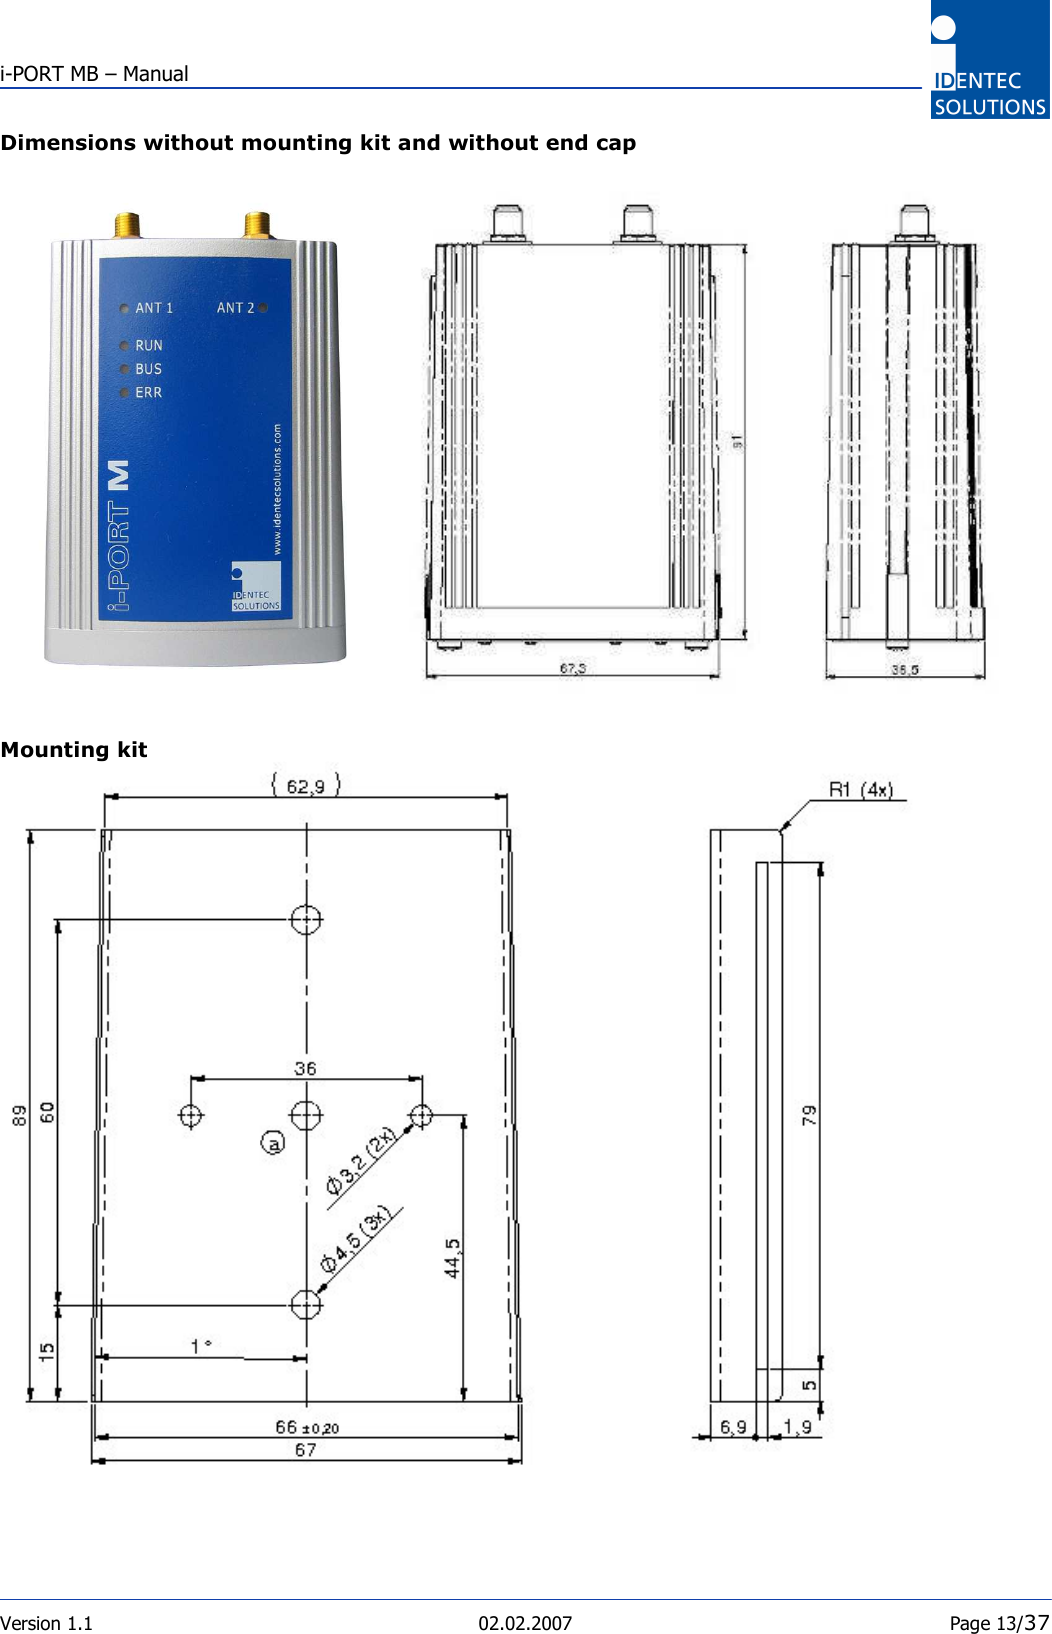  i-PORT MB – Manual  Version 1.1  02.02.2007  Page 13/37 Dimensions without mounting kit and without end cap                        Mounting kit  